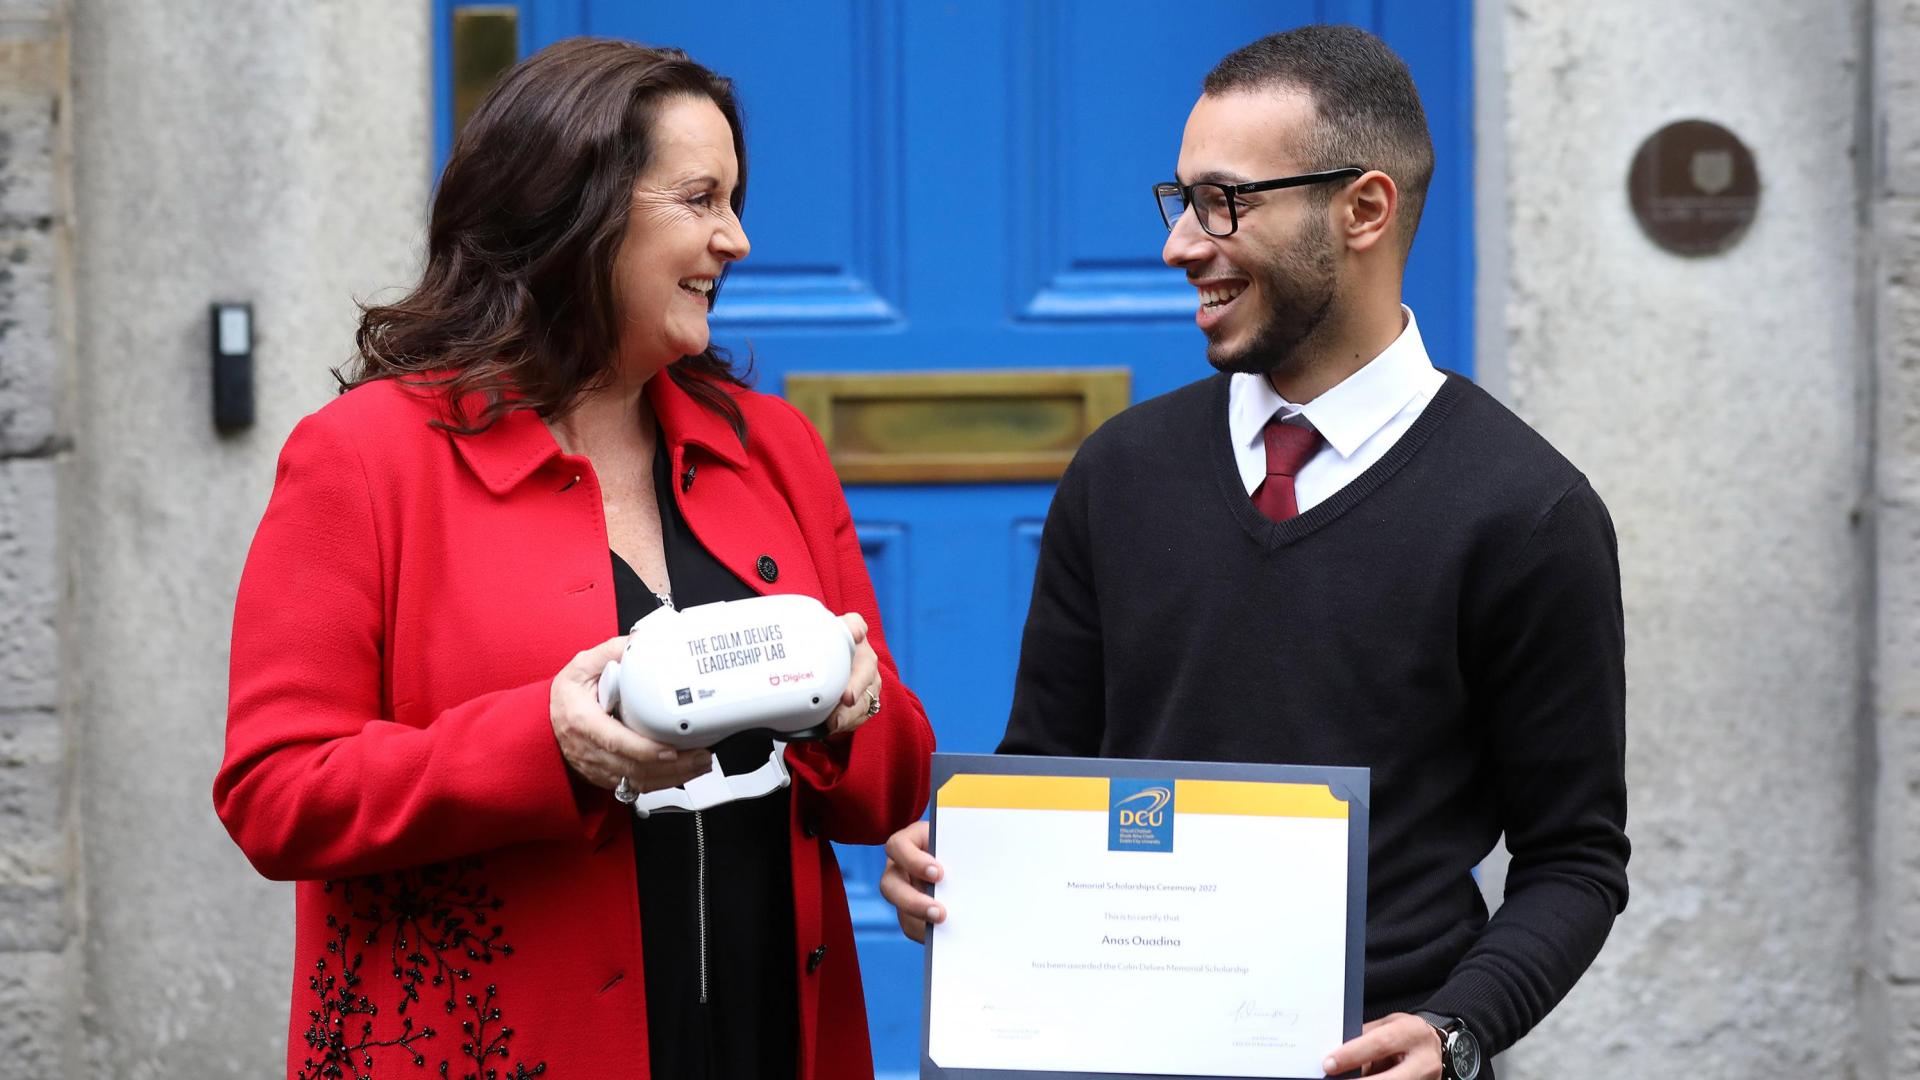 New virtual reality leadership lab in memory of Colm Delves puts DCU at the cutting edge